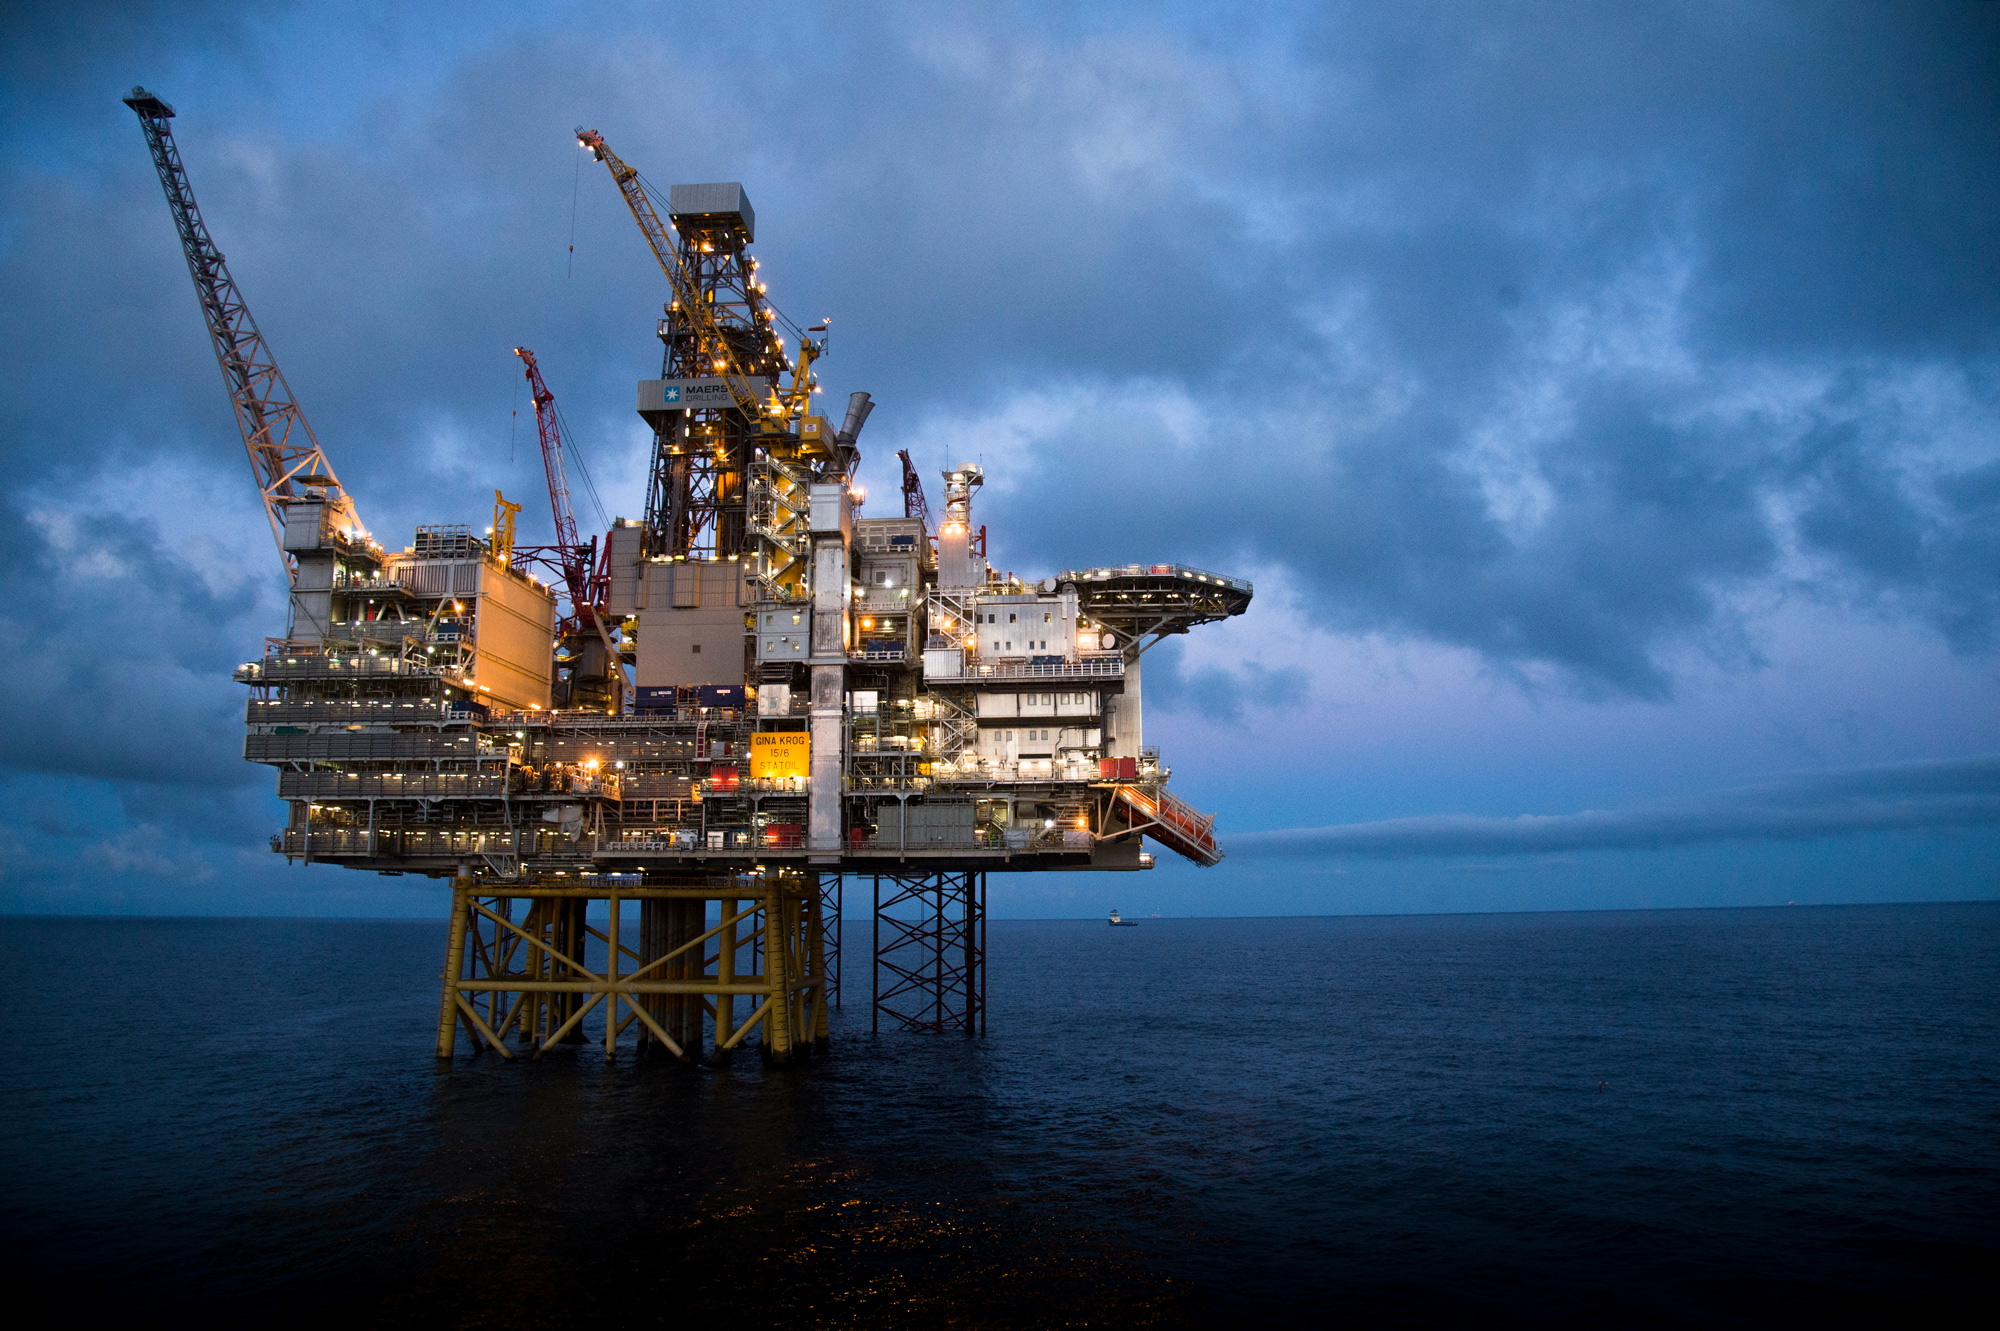 An oil and gas platform at the&nbsp;Gina Krog field in the North Sea